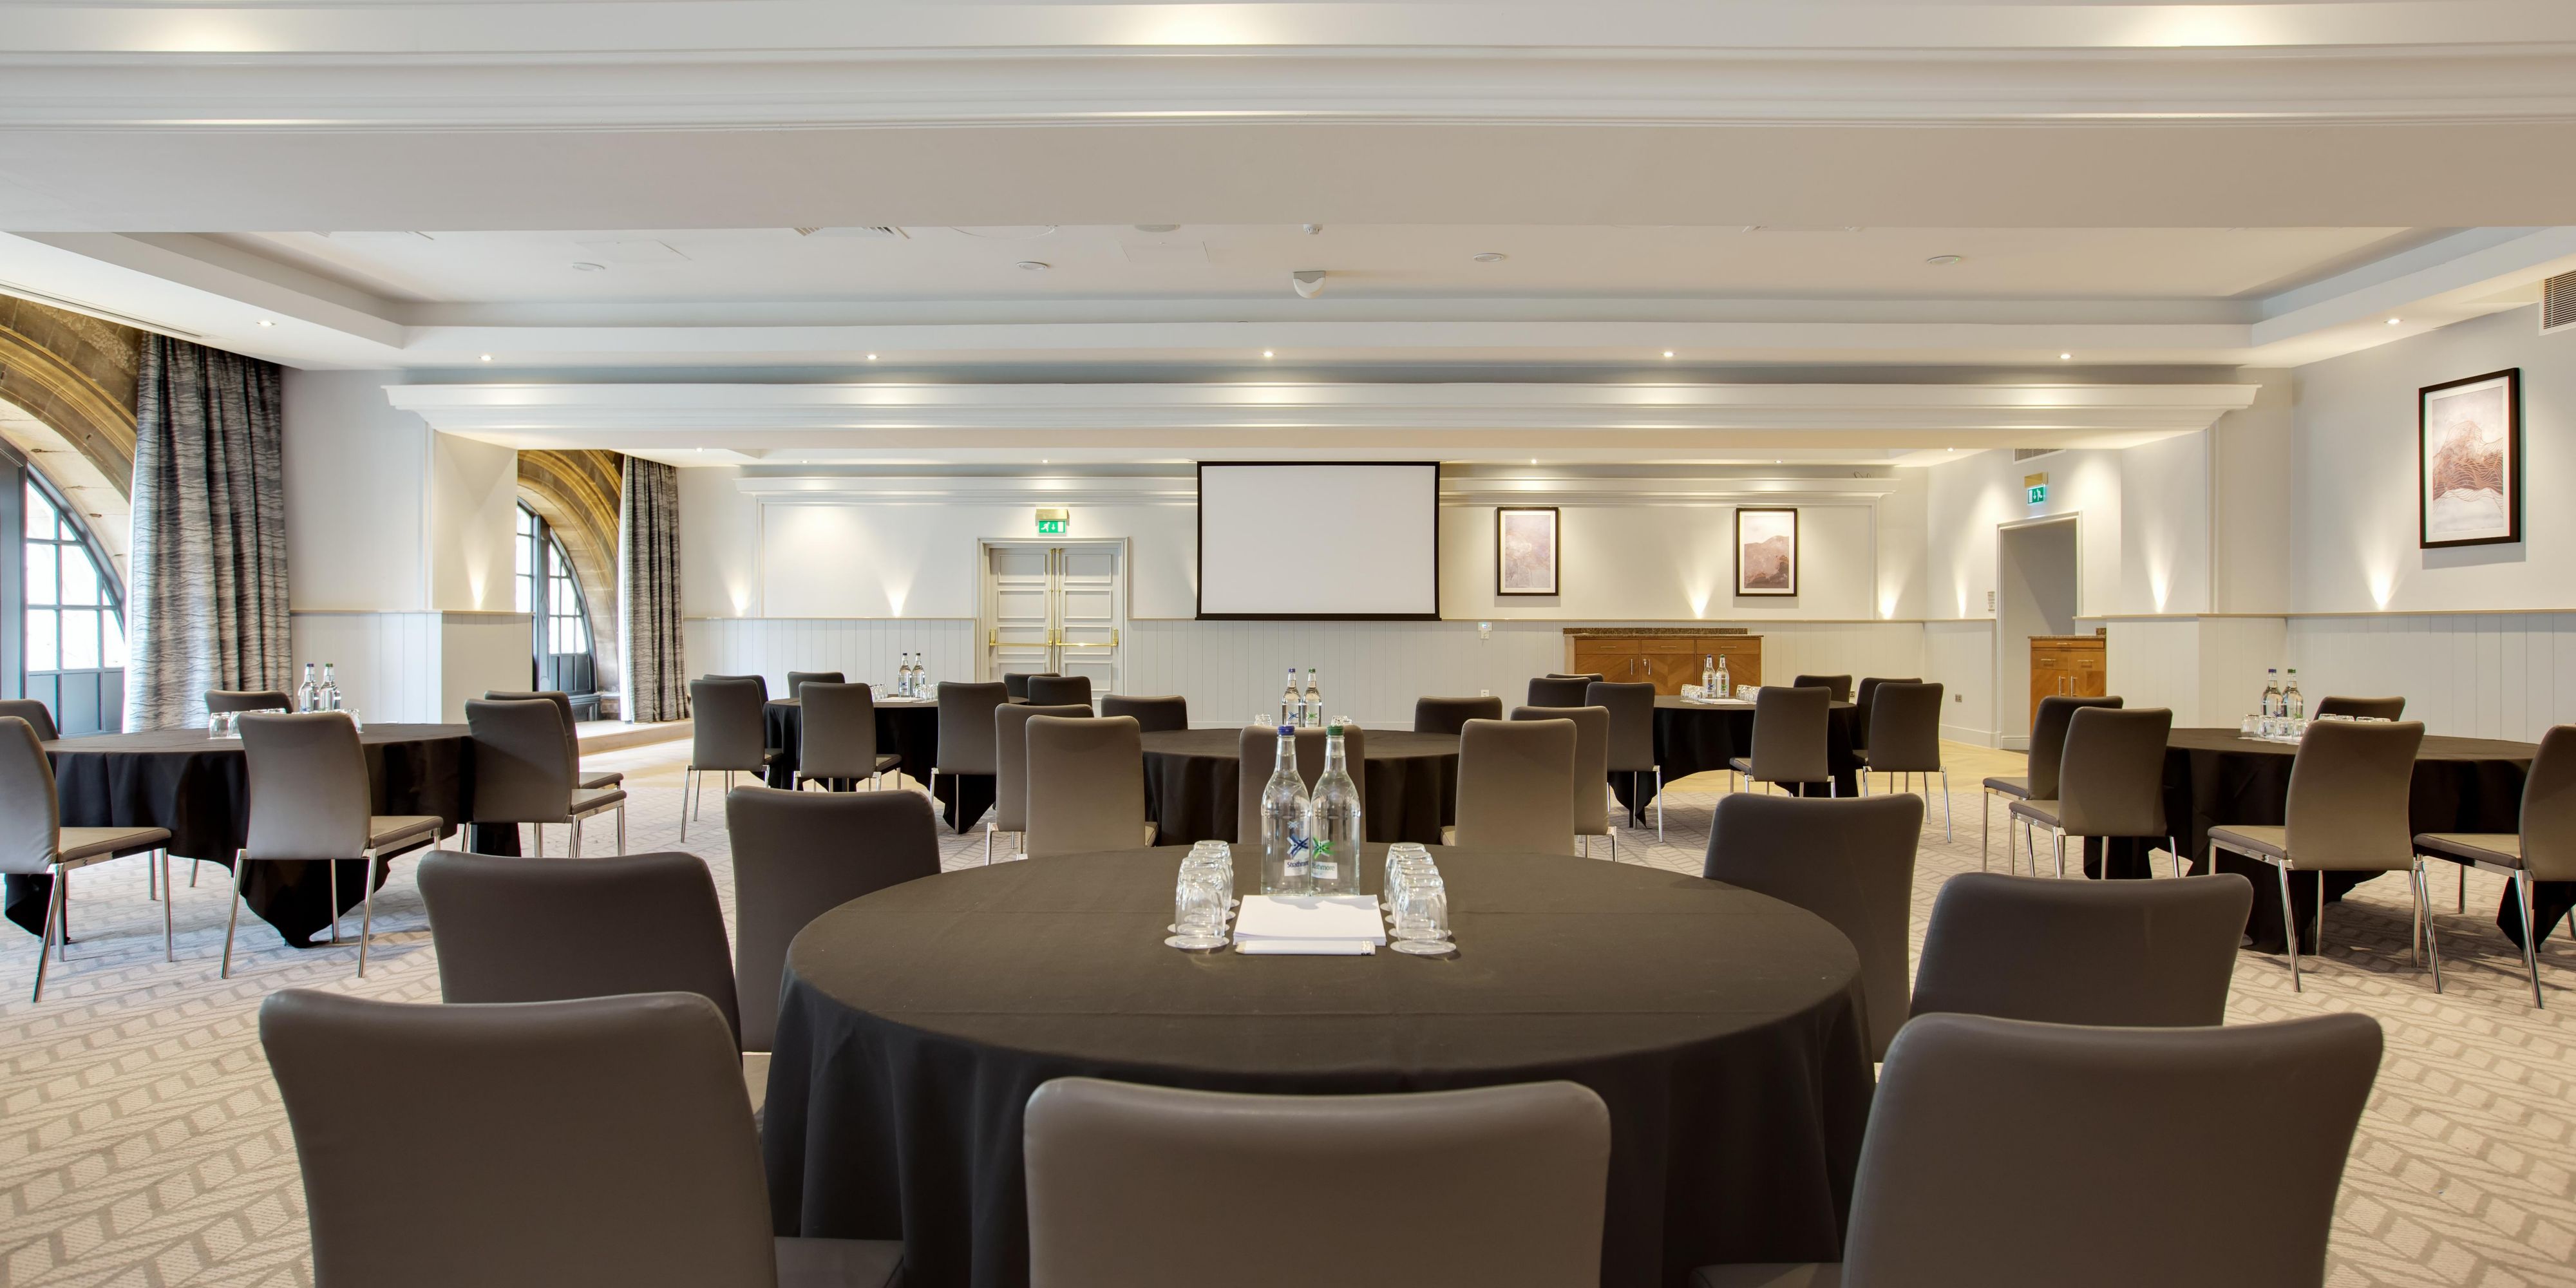 Spacious with natural daylight, the Victoria is ideal for meetings